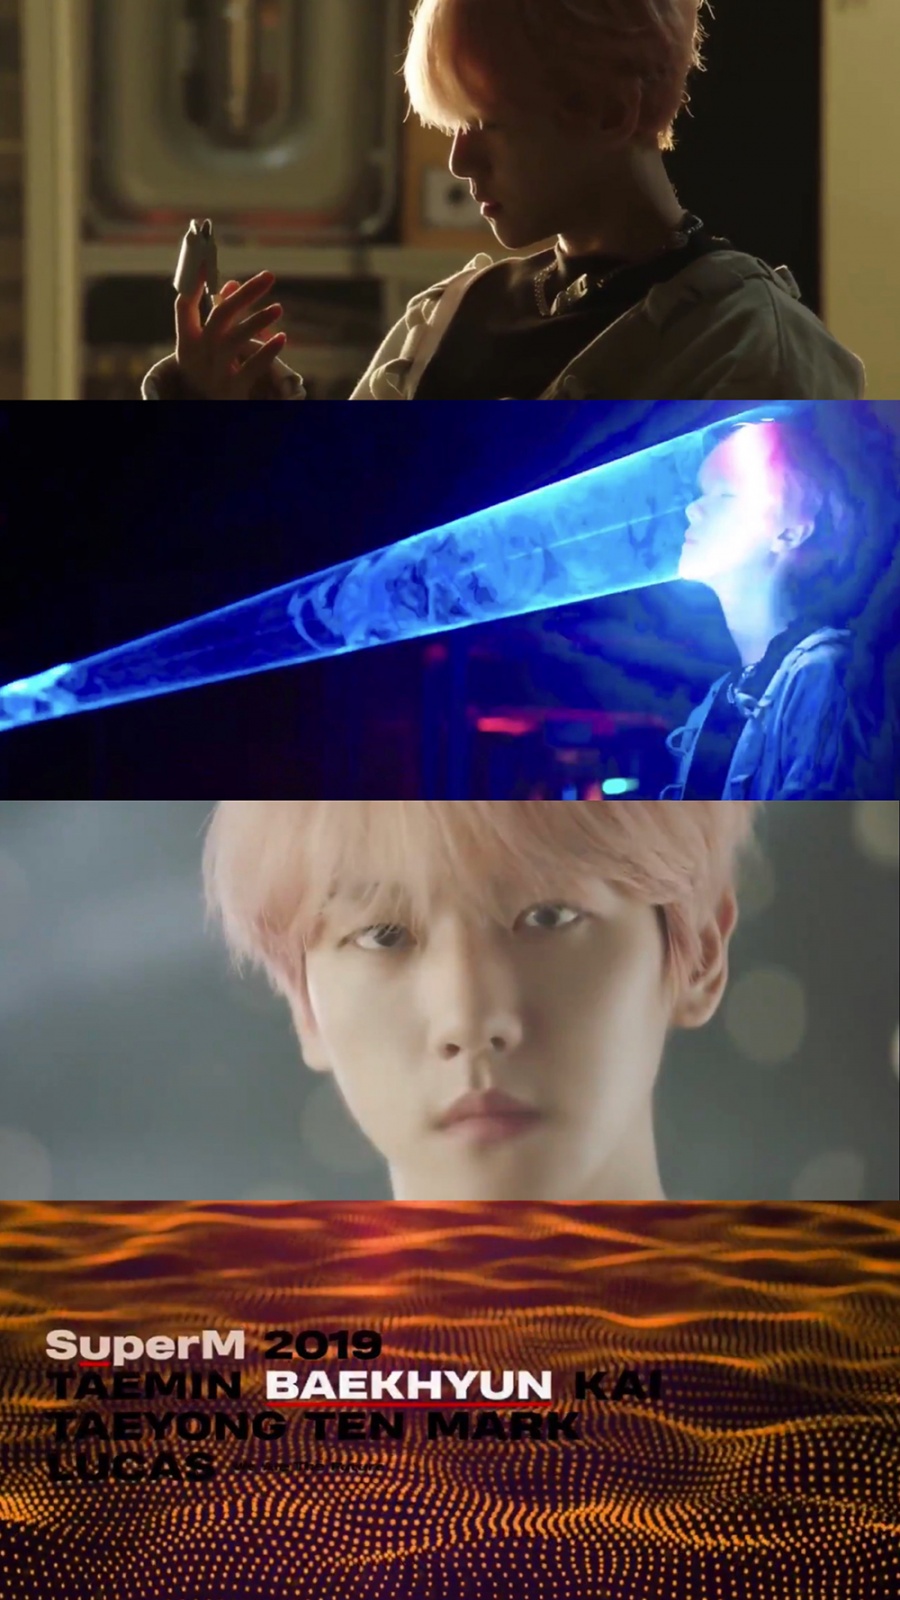 Baekhyun stepped up as the first runner on SuperM Personal Trailer.SM Entertainment (hereinafter SM) released its first Trailer video of SuperM Baekhyun on its official SNS channel at 0:00 on the 2nd.In the public image, the dreamy atmosphere and the intense eyes of Baekhyun are filled with a scene of the movie, capturing the attention of fans.In addition, the concept image that predicts the new charm of Baekhyun, which has not been seen in the meantime, along with the Trailer video, will be released sequentially every day, raising expectations.SuperM is a coalition team of seven outstanding artists, including SHINee Taemin, EXO Baekhyun and Kai, Tae Yong and Mark of NCT 127, and China group Lee Jin-hyuk V Lucas and Ten.It is a large unit of SM Boy Group, which is gaining global popularity such as SHINee, EXO, NCT 127 and Lee Jin-hyuk V. It is receiving all world attention from before debut.SuperMs first Mini album SuperM will be released simultaneously on October 4th.